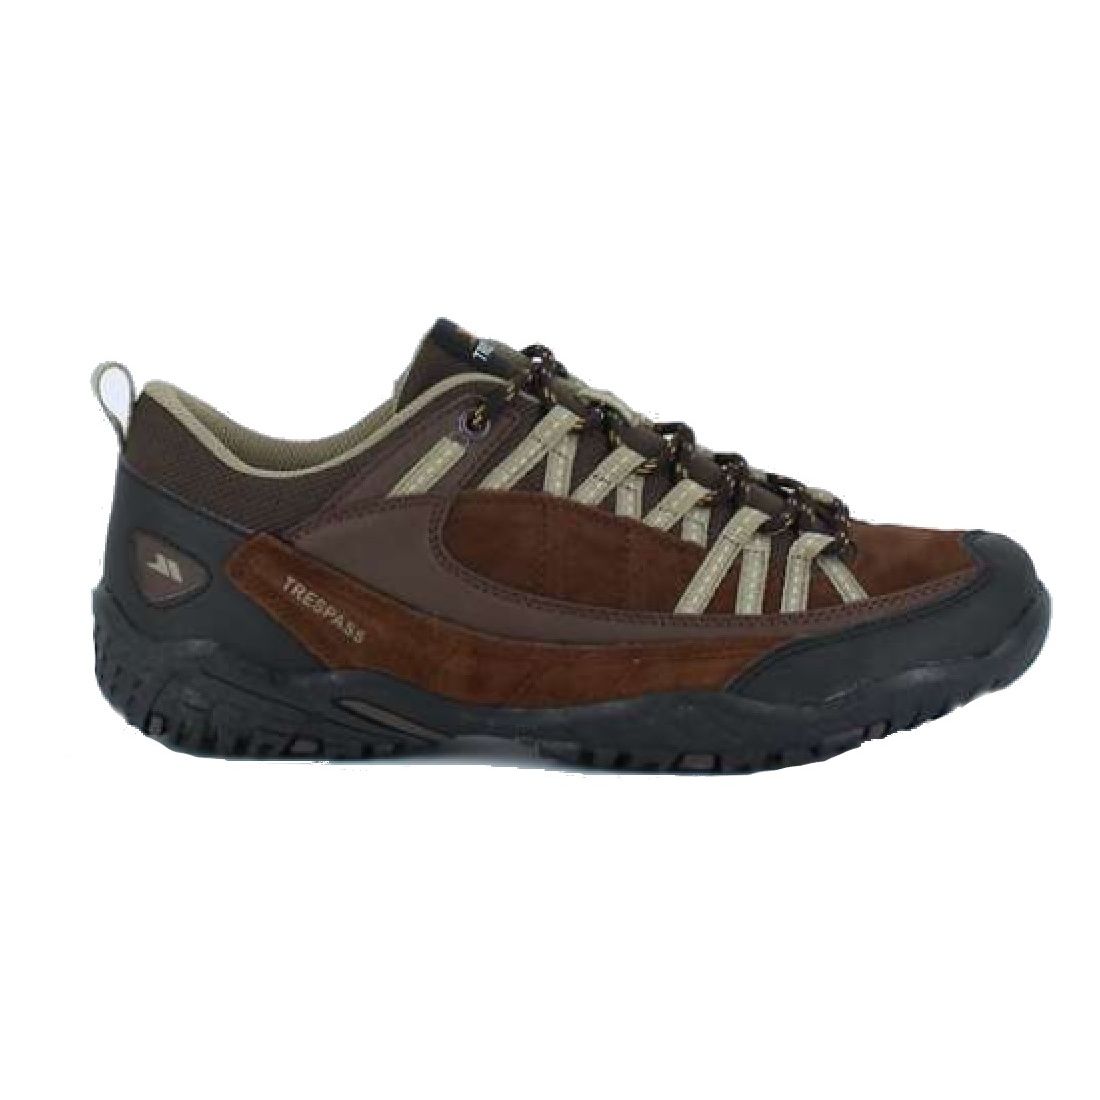 Mens walking lifestyle low. Easy-flow lacing system. Arch stabilising and supportive shank. Cushioned and contoured footbed. Upper: Cow suede/PU/Textile, Lining: Textile, Insole: Moulded EVA, Outsoule: Rubber.